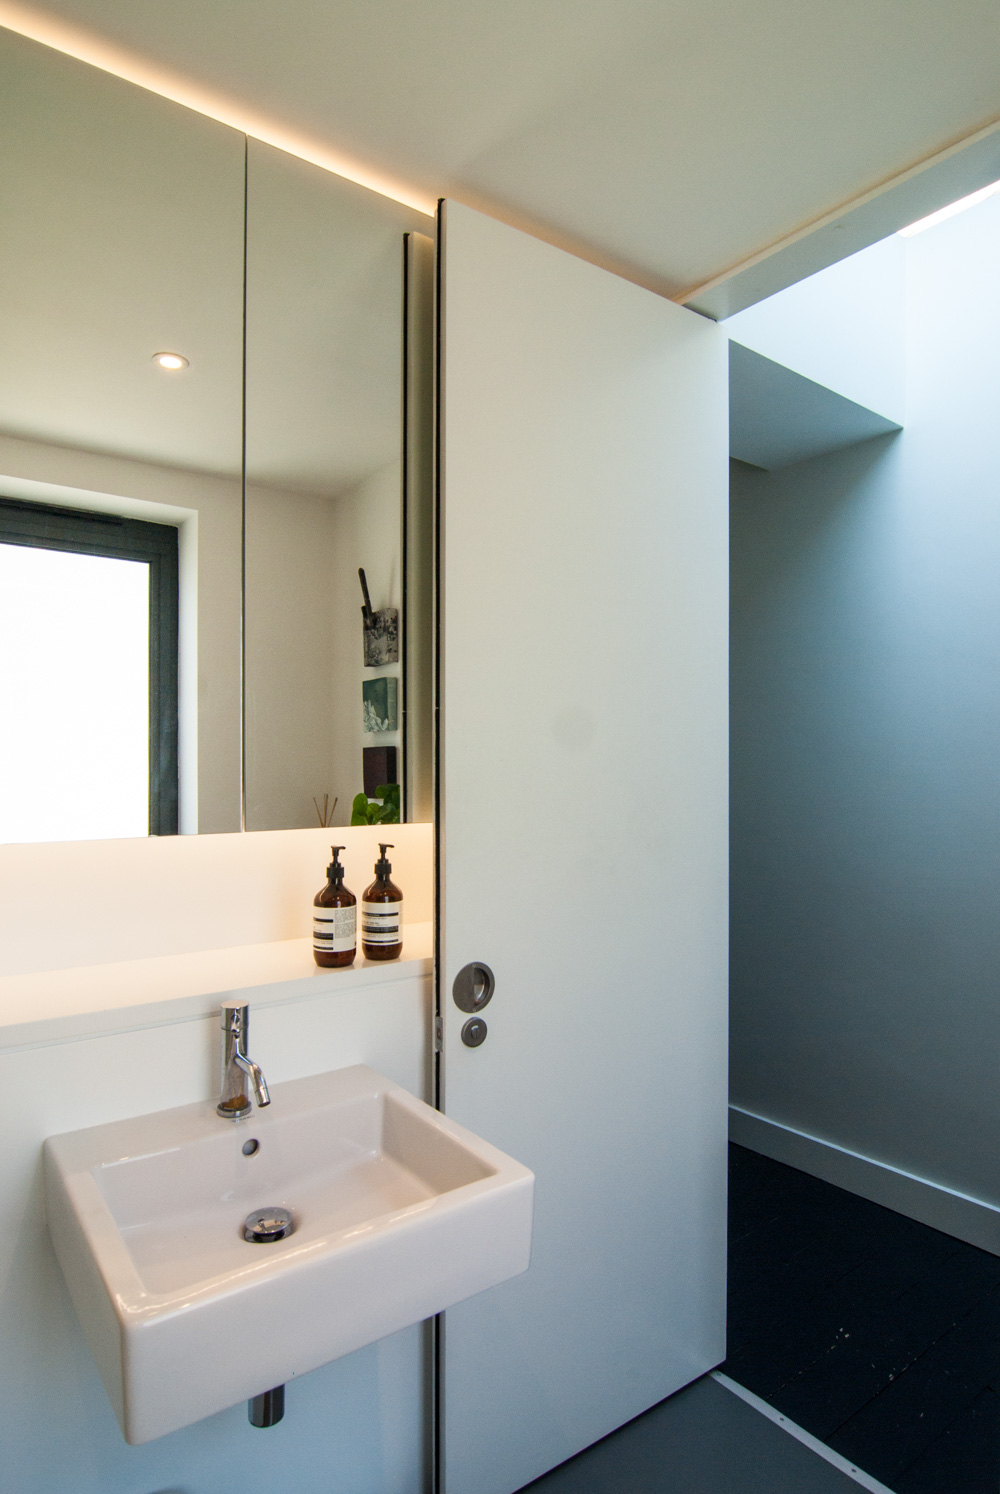 Minimal palette bathroom offers plenty of light to reflect off the mirrors facing the window.